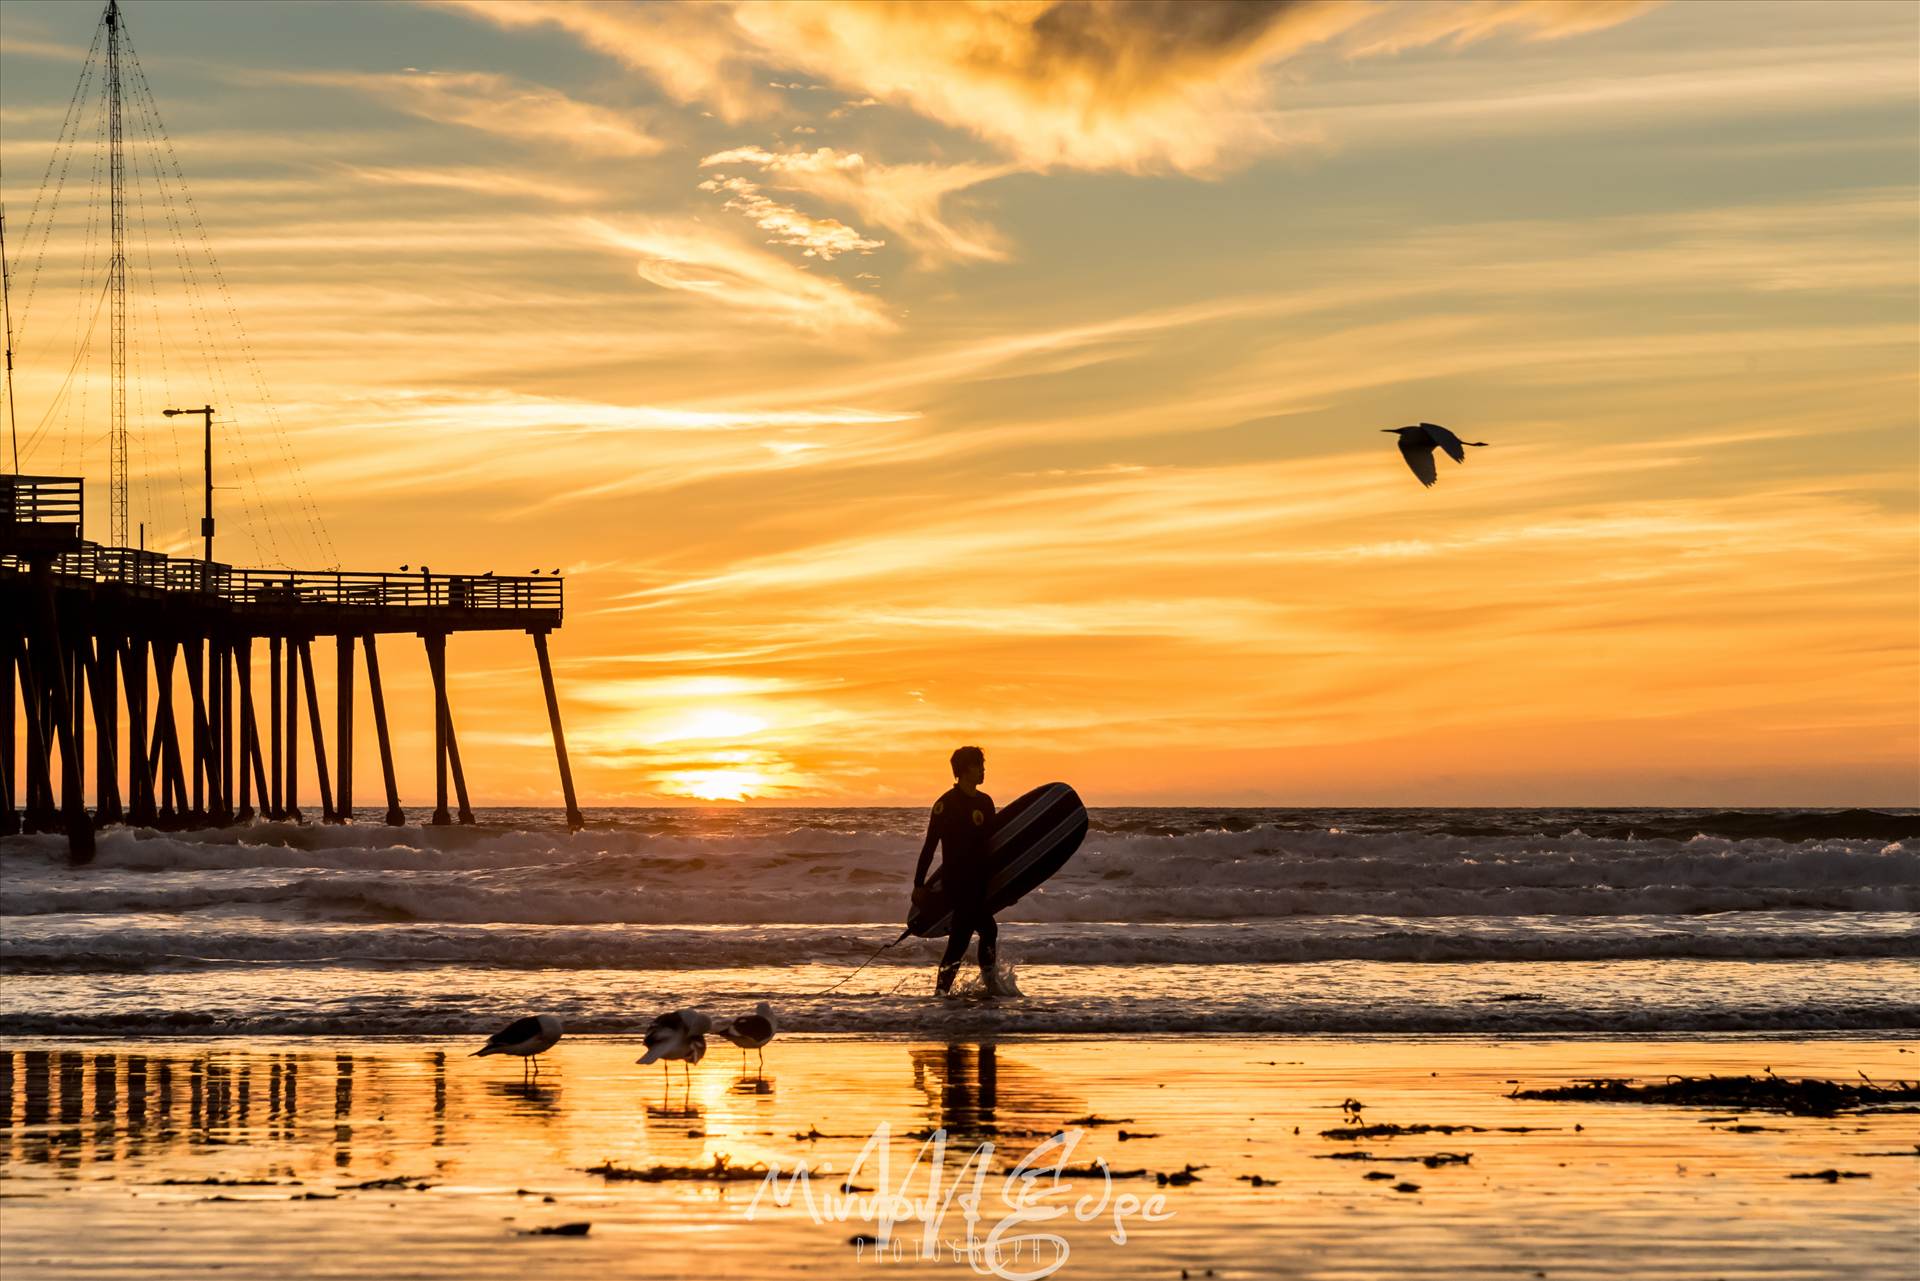 Sunset Surfing and a Flying Bird.jpg undefined by Sarah Williams